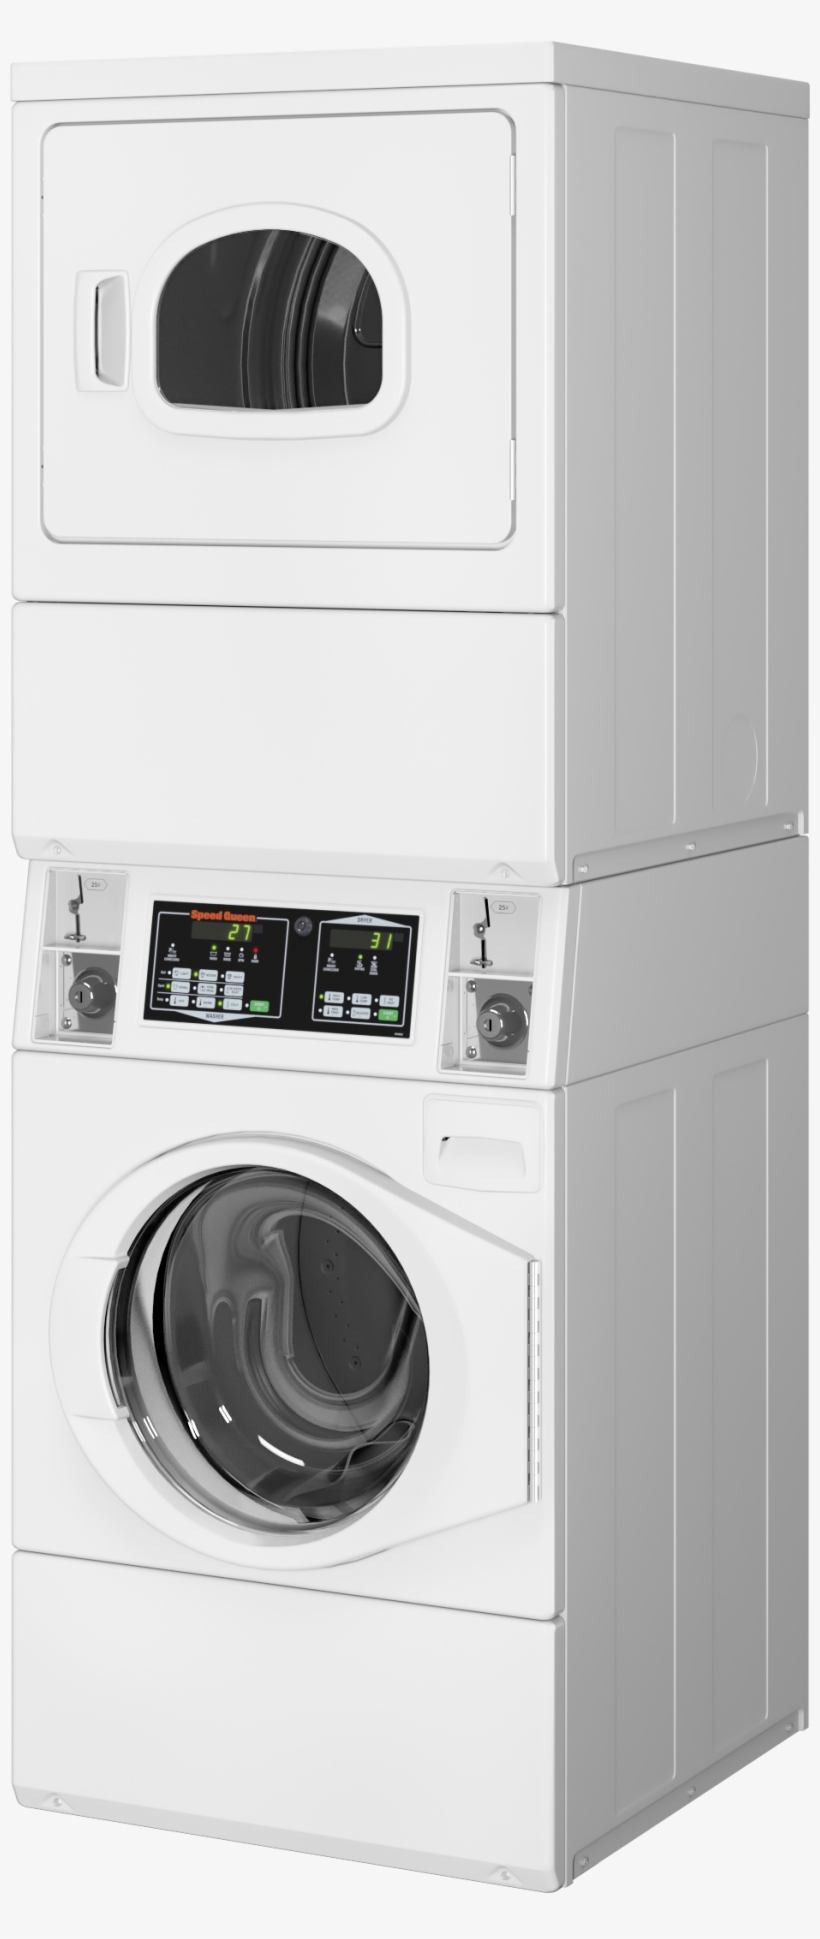 St Drop Qntm 3-4l - Stacked Washer Dryer Speed Queen, transparent png #4274576